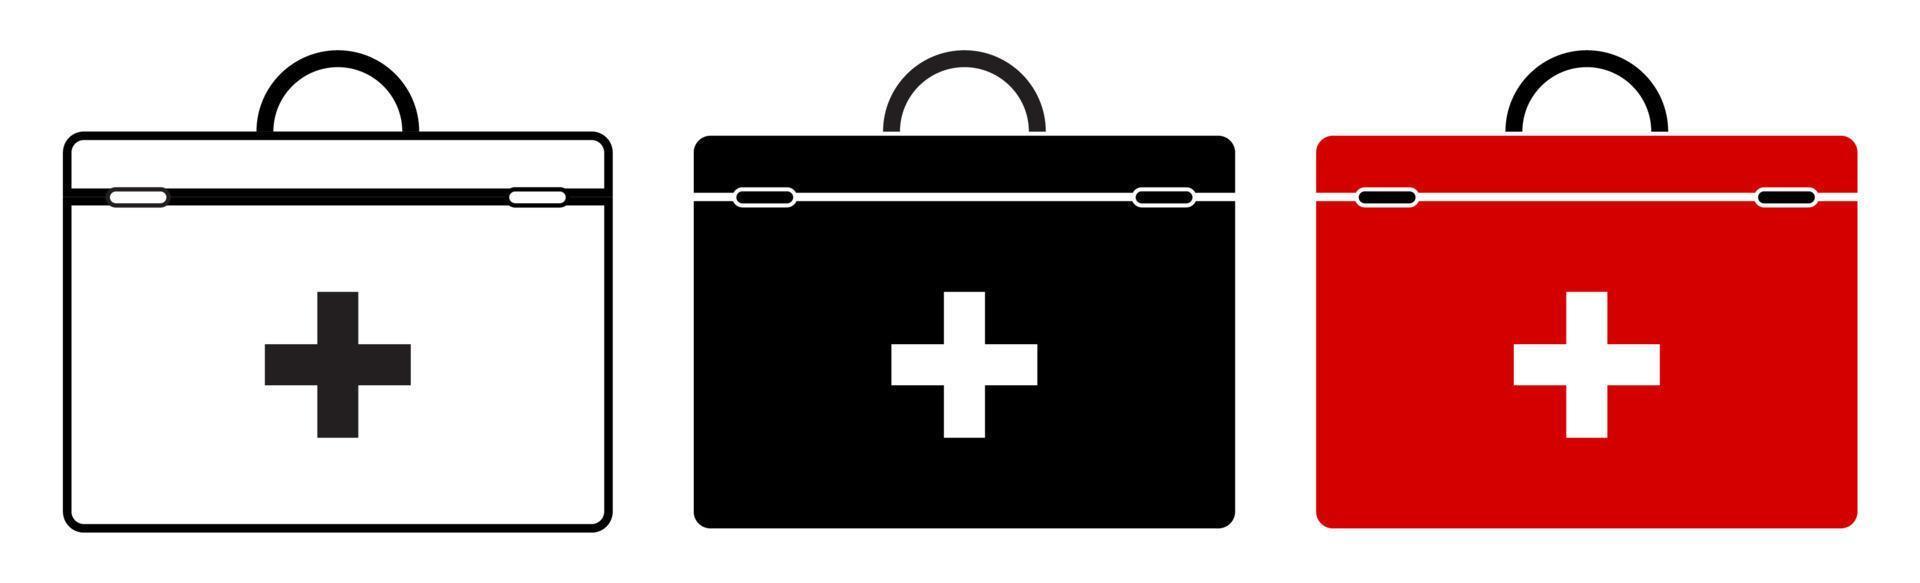 icon set red first aid kit for resuscitation. Health recovery in emergency situations. Isolated vector in a flat style on a white background